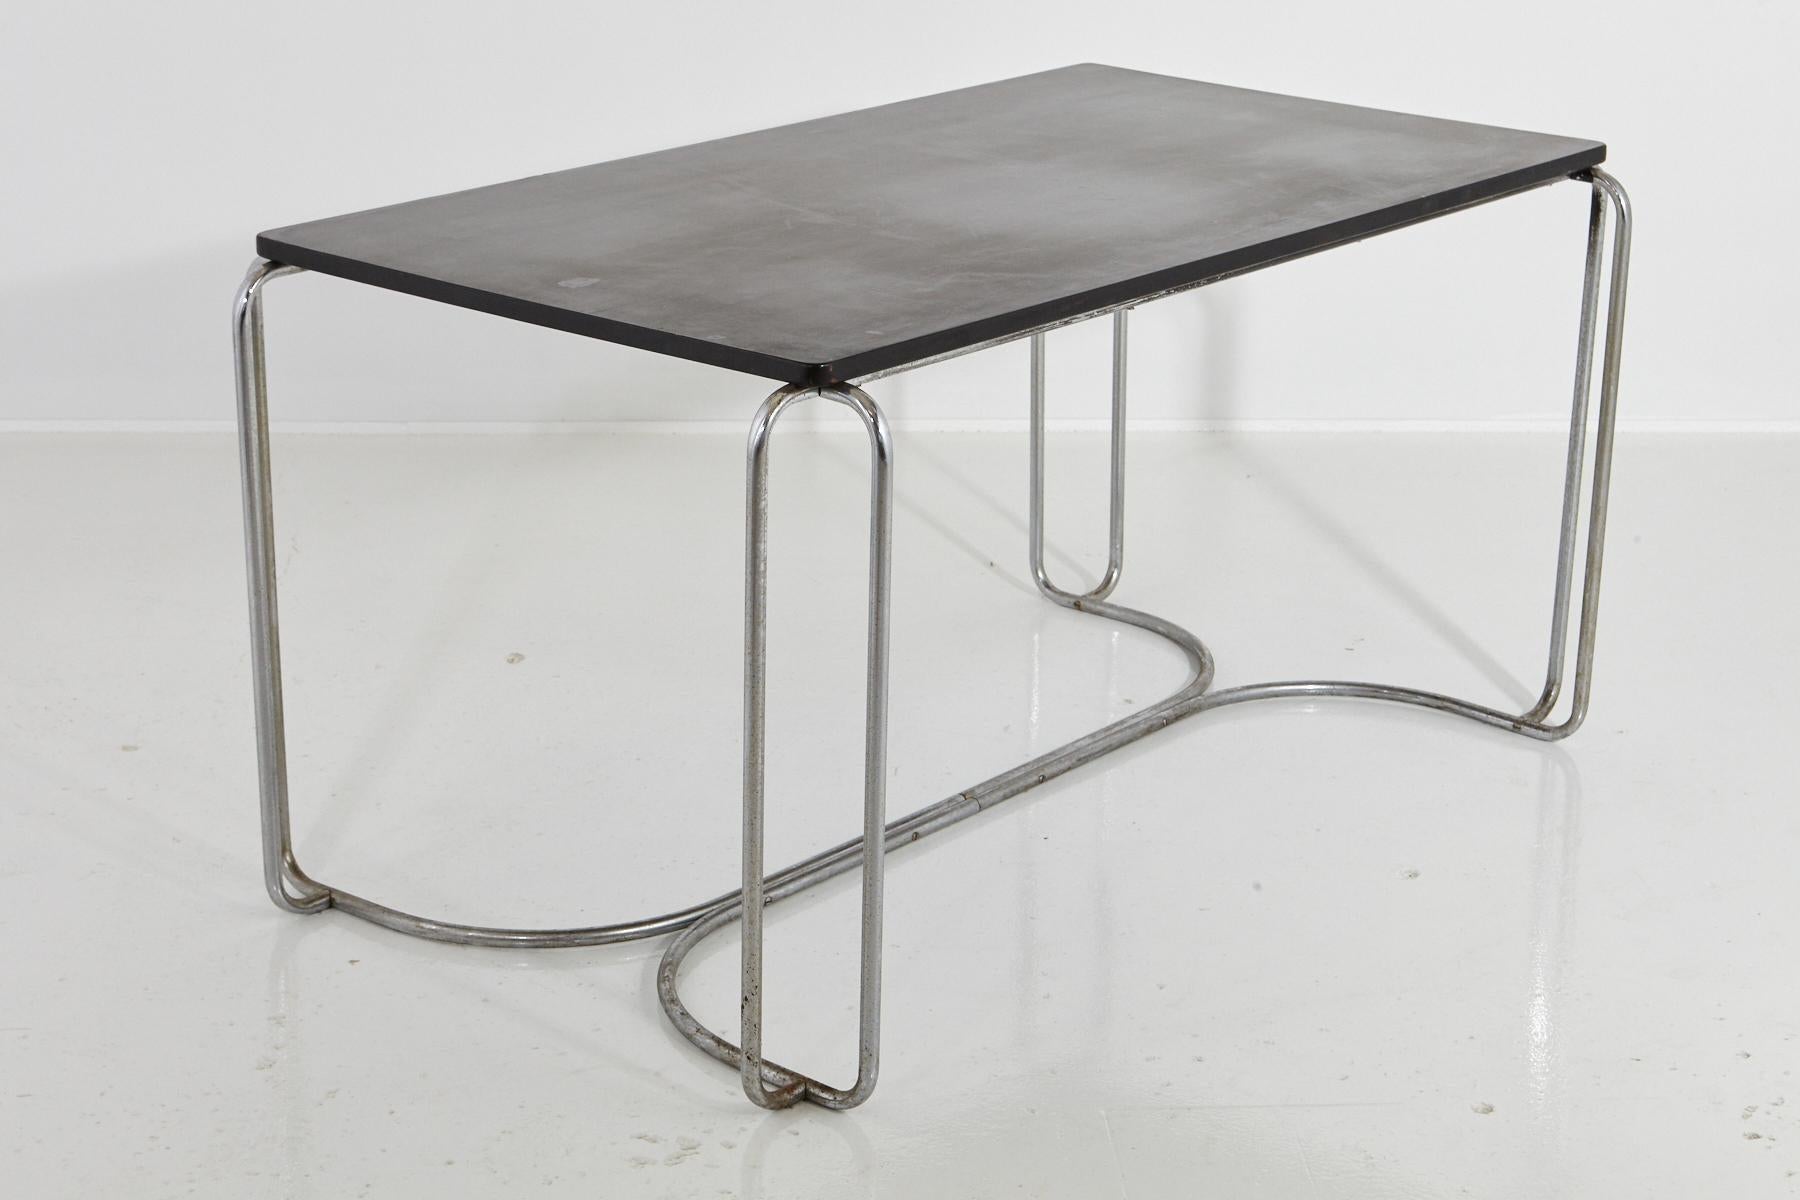 Mid-20th Century Art Deco Tubular Chrome Desk/Library Black Top Table Attrib to Wolfgang Hoffmann For Sale